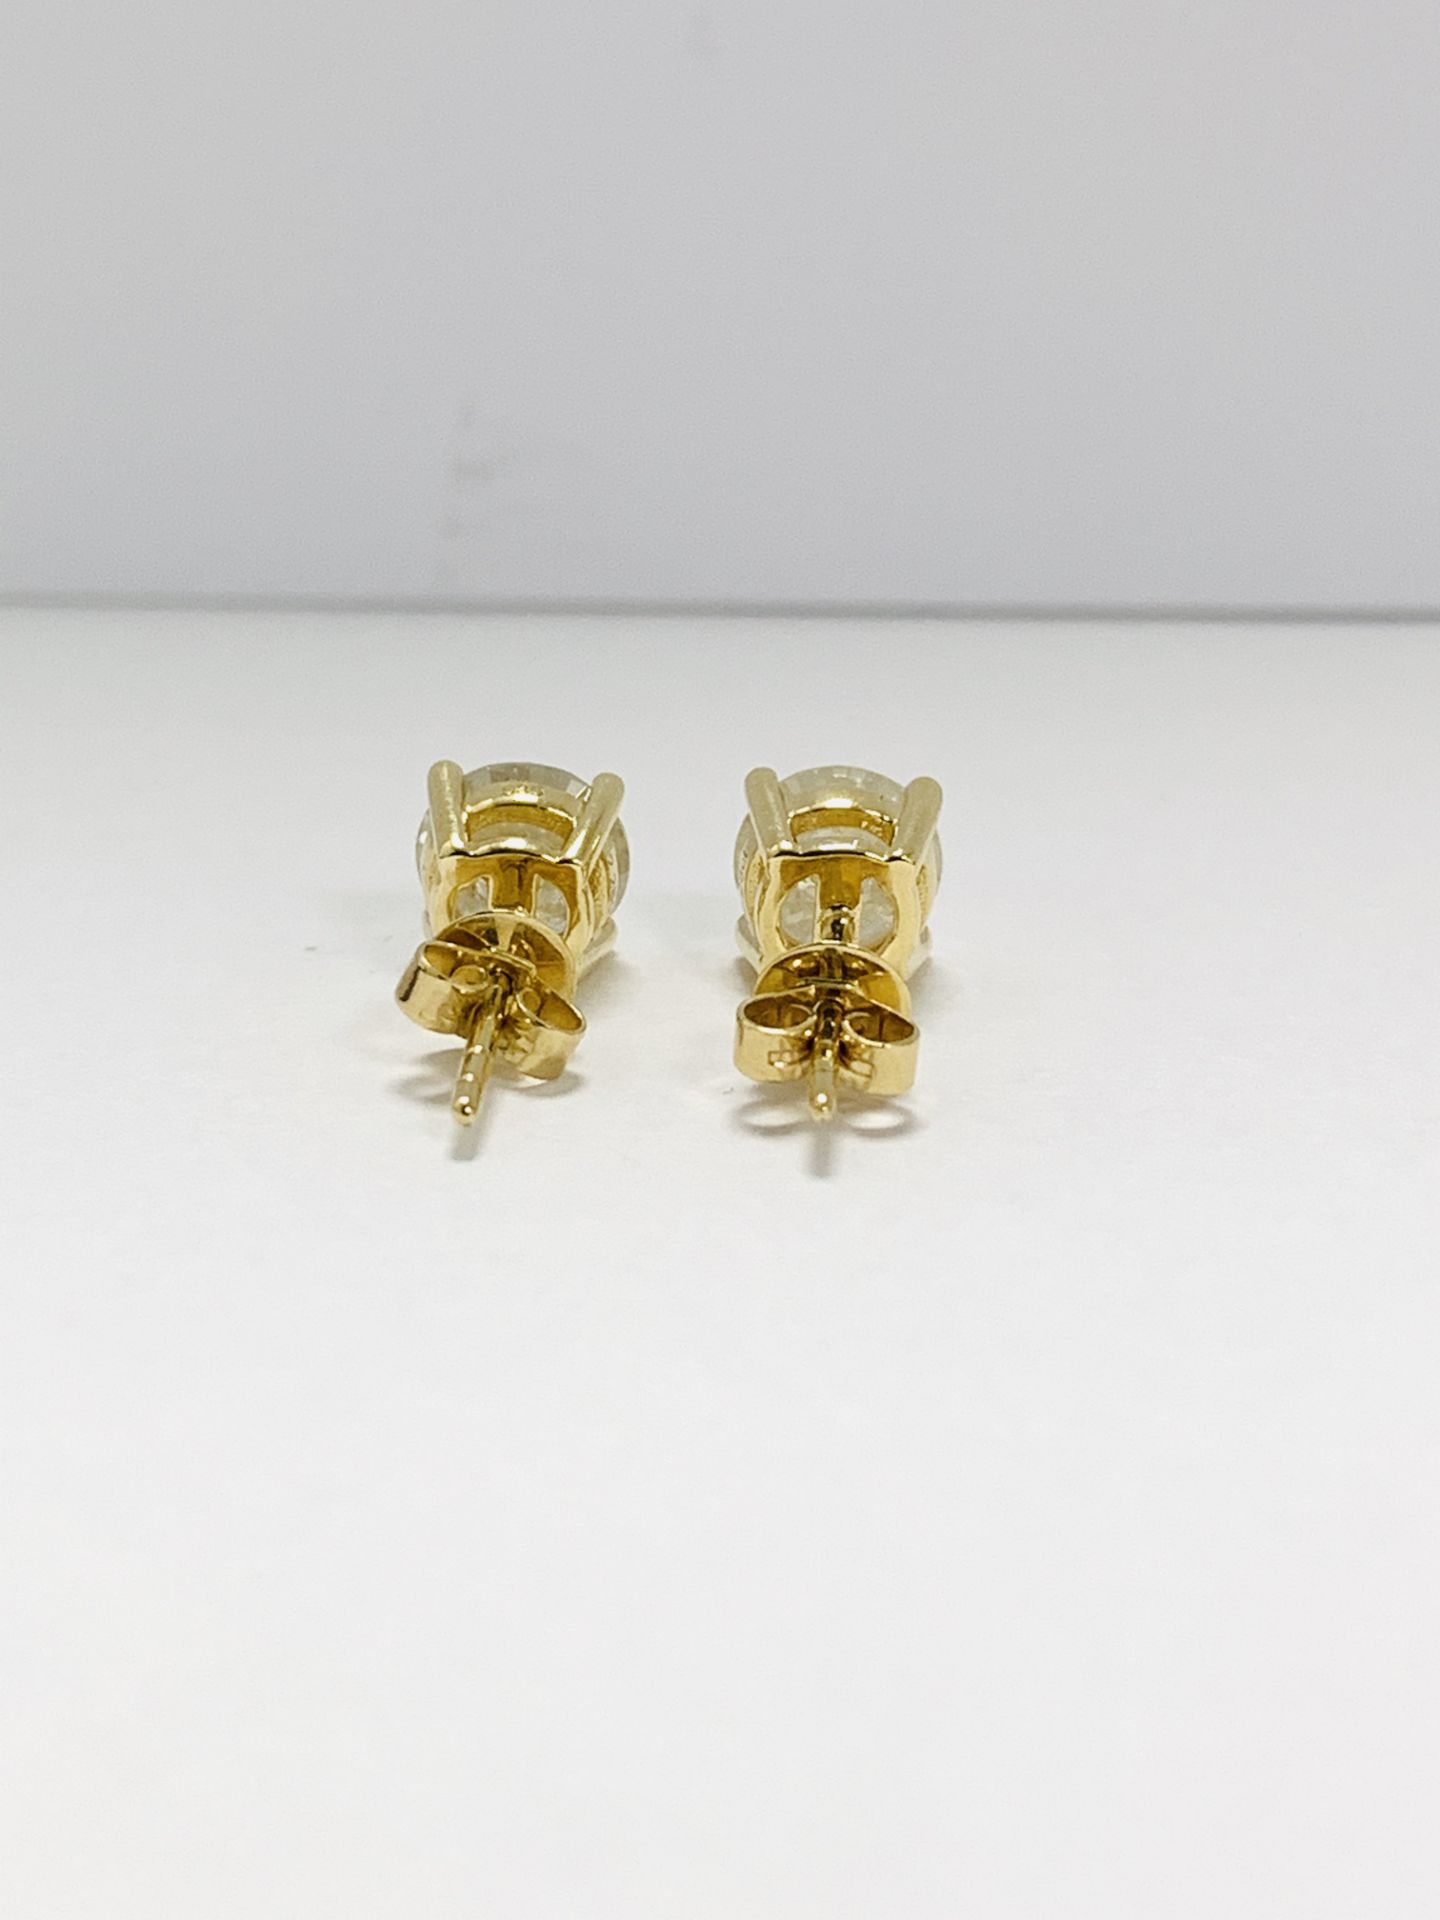 14K Yellow Gold Pair Of Earrings - Image 3 of 5